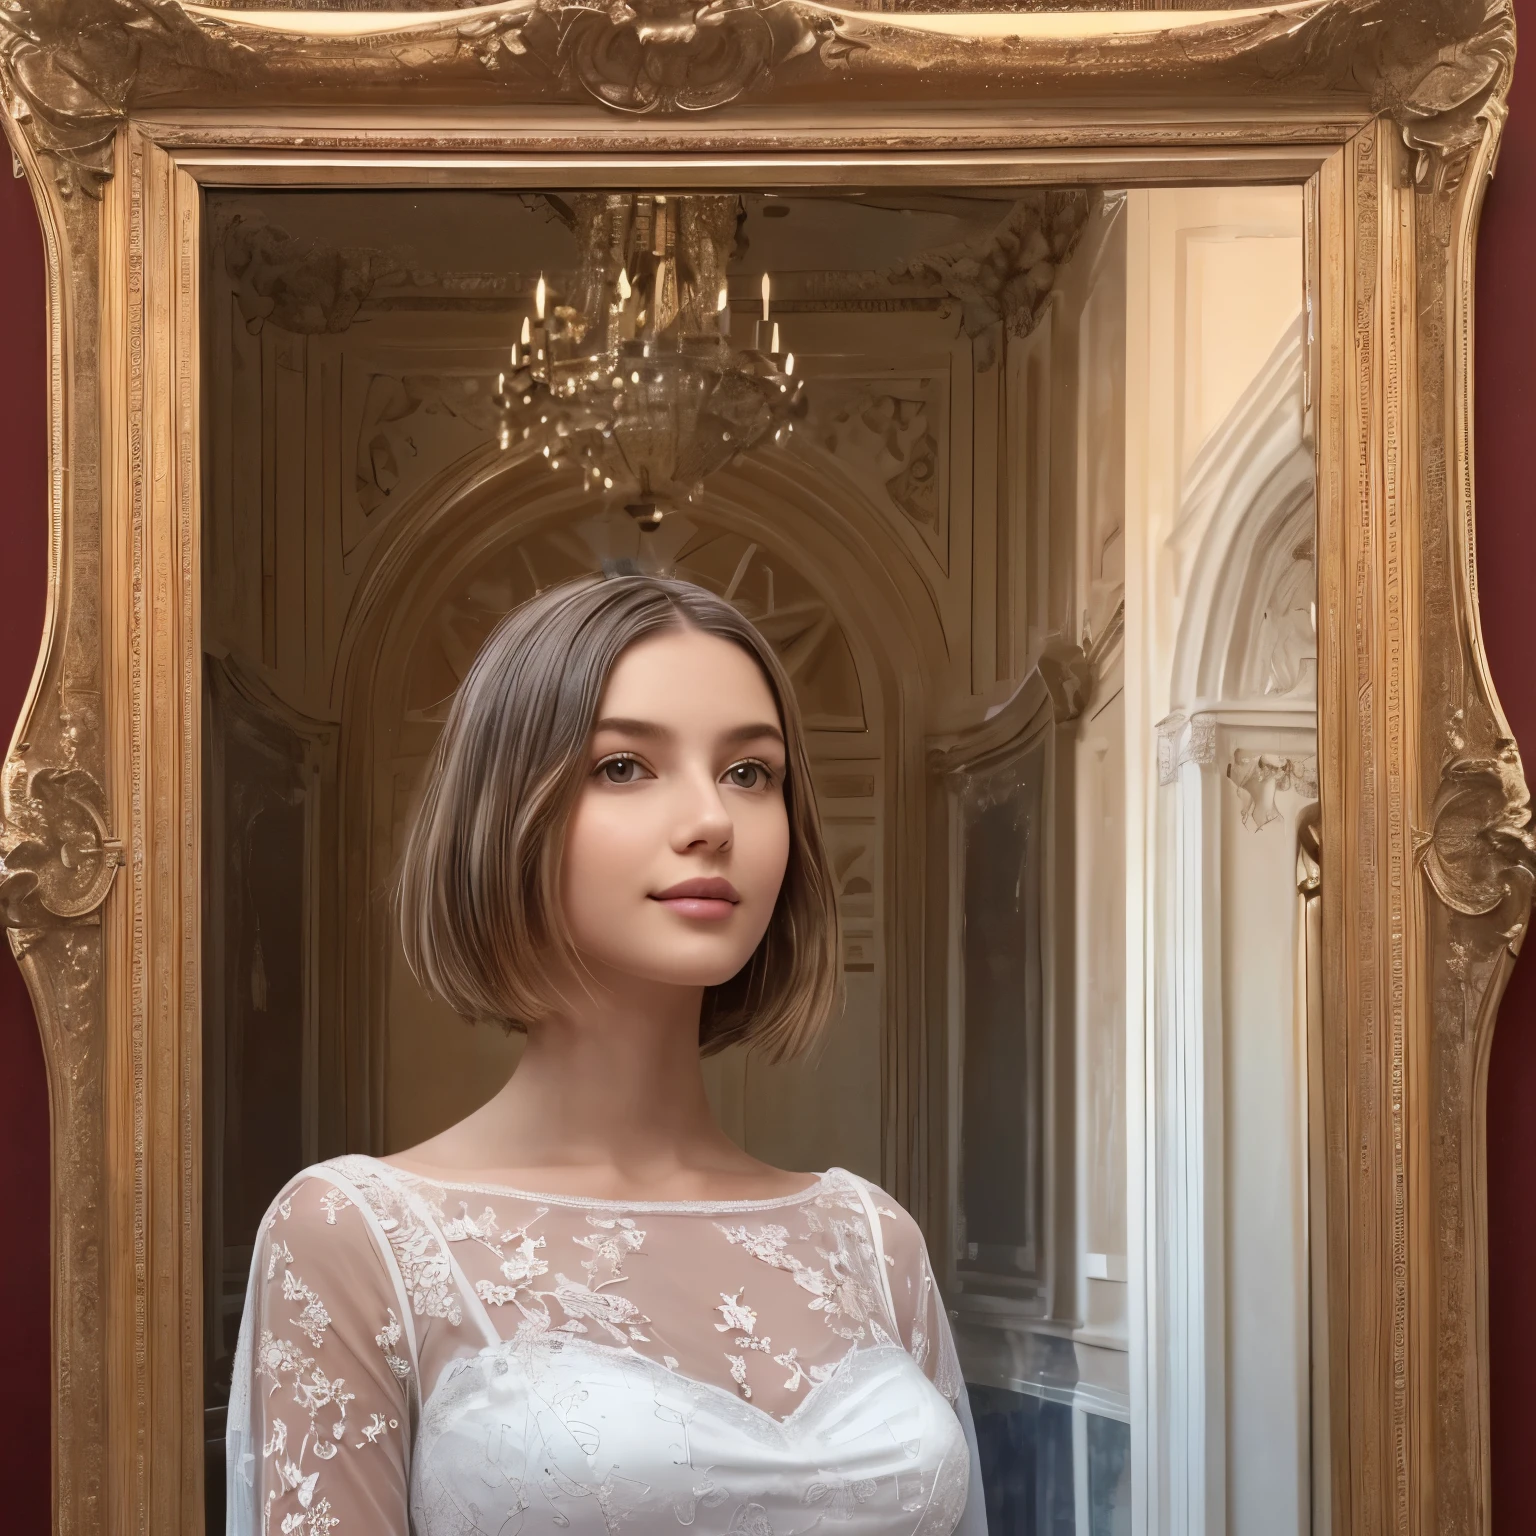 142
(a 20 yo woman,in the palace), (A hyper-realistic), (high-level image quality), ((beautiful hairstyle 46)), ((short-hair:1.46)), (kindly smile), (breasted:1.1), (lipsticks), (wearing a blue dress), (murky,wide,Luxurious room), (florals), (an oil painting、Rembrandt)